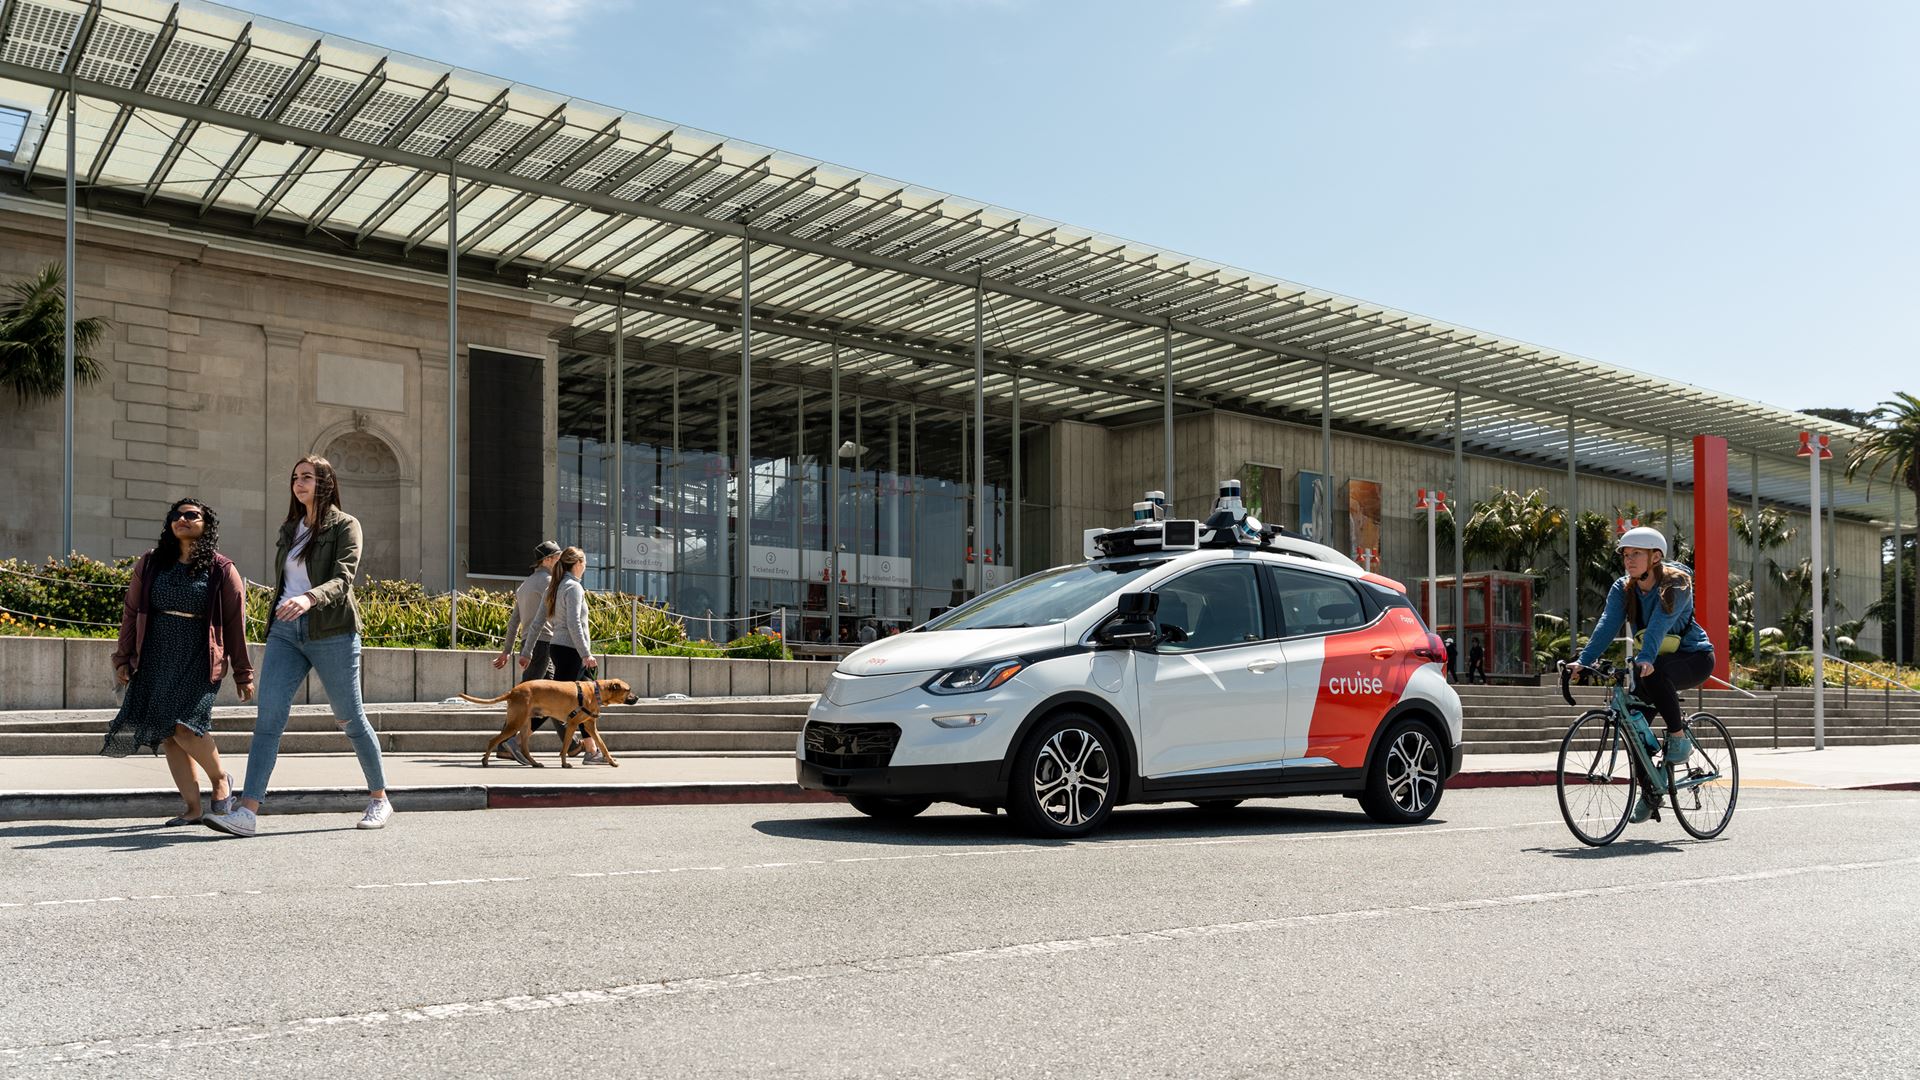 Cruise s License to Operate Fully Autonomous Vehicles in California is Suspended